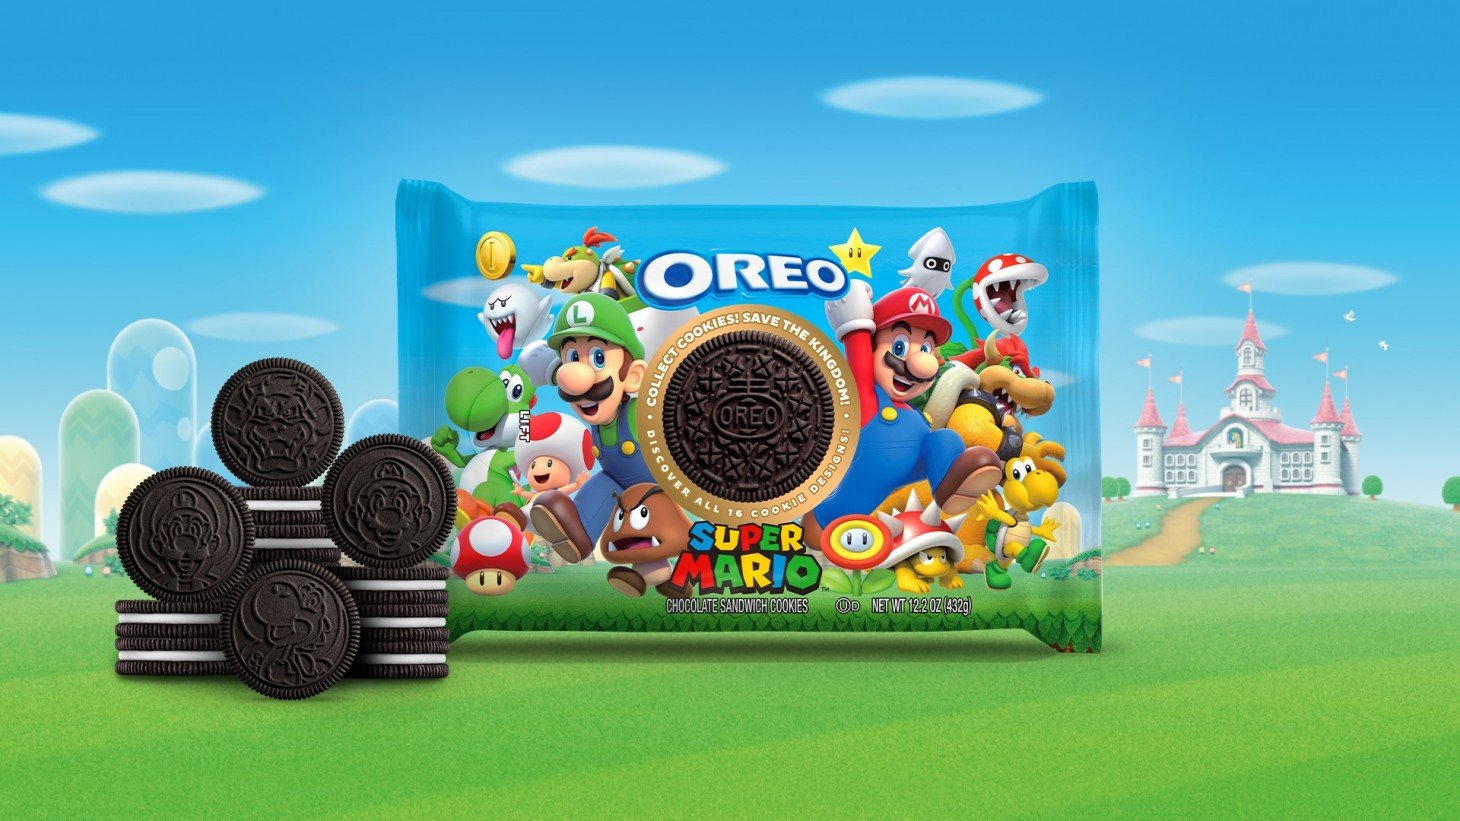 Limited edition Super Mario OREO cookies revealed